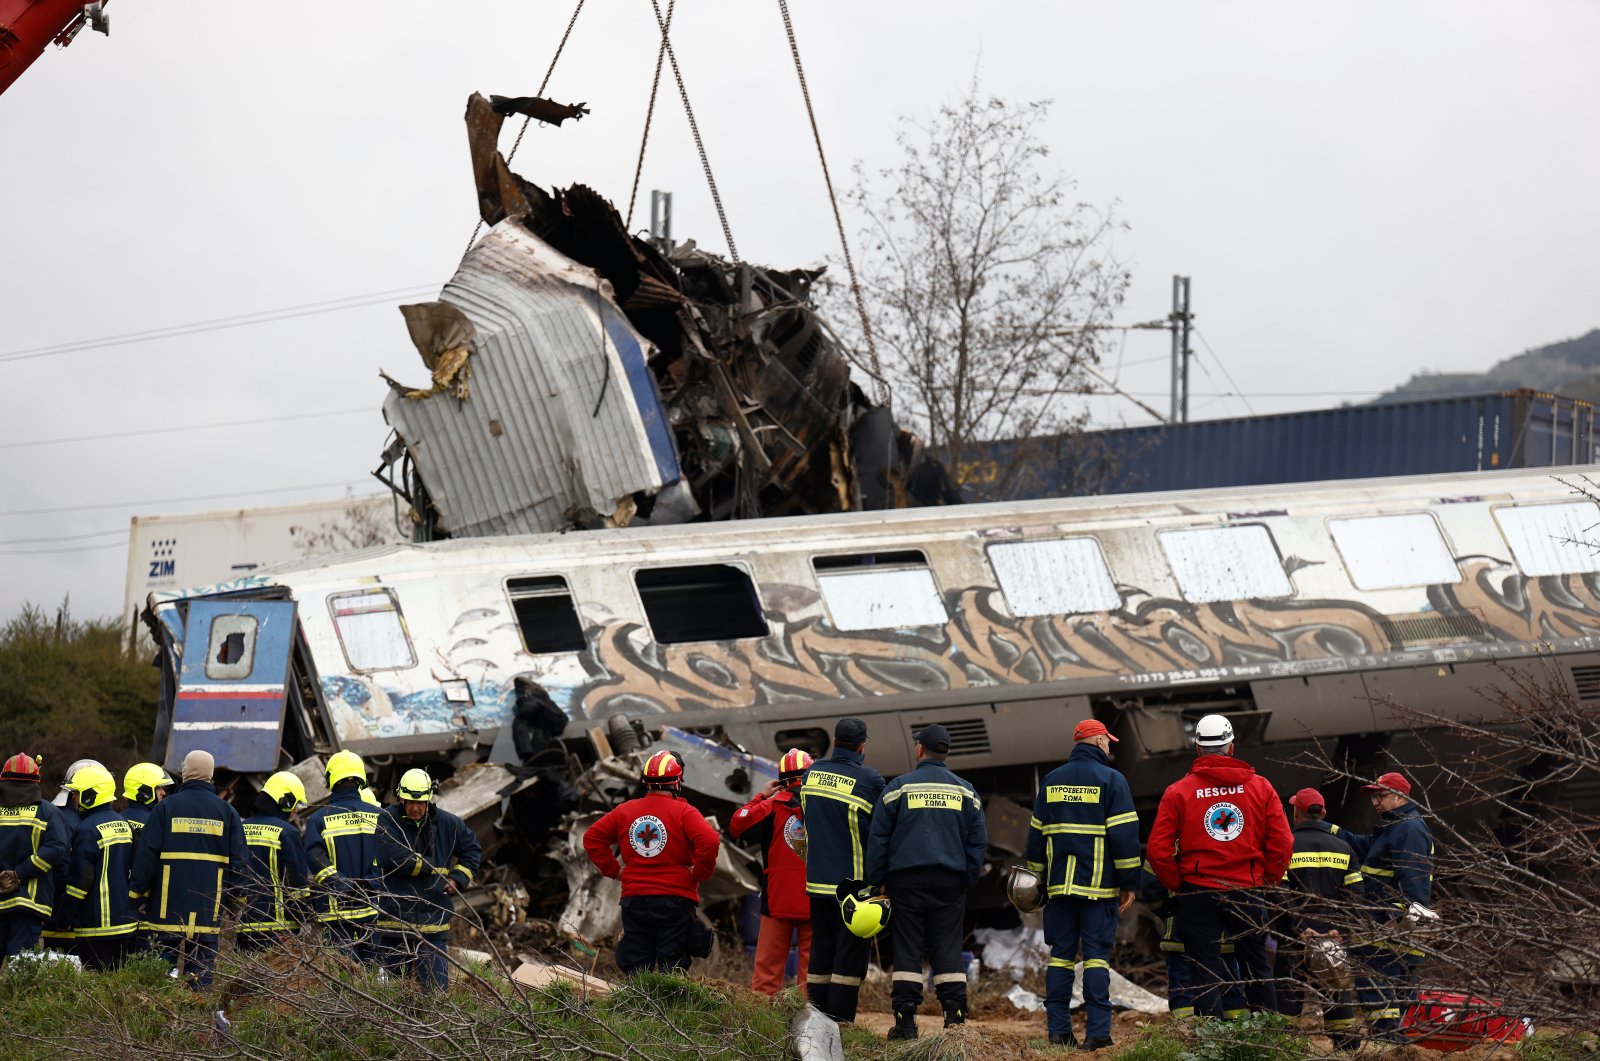  Crane vehicles try to remove pieces of damaged train wagon after a collision near Larissa city, Greece, March 1, 2023. (EPA Photo)